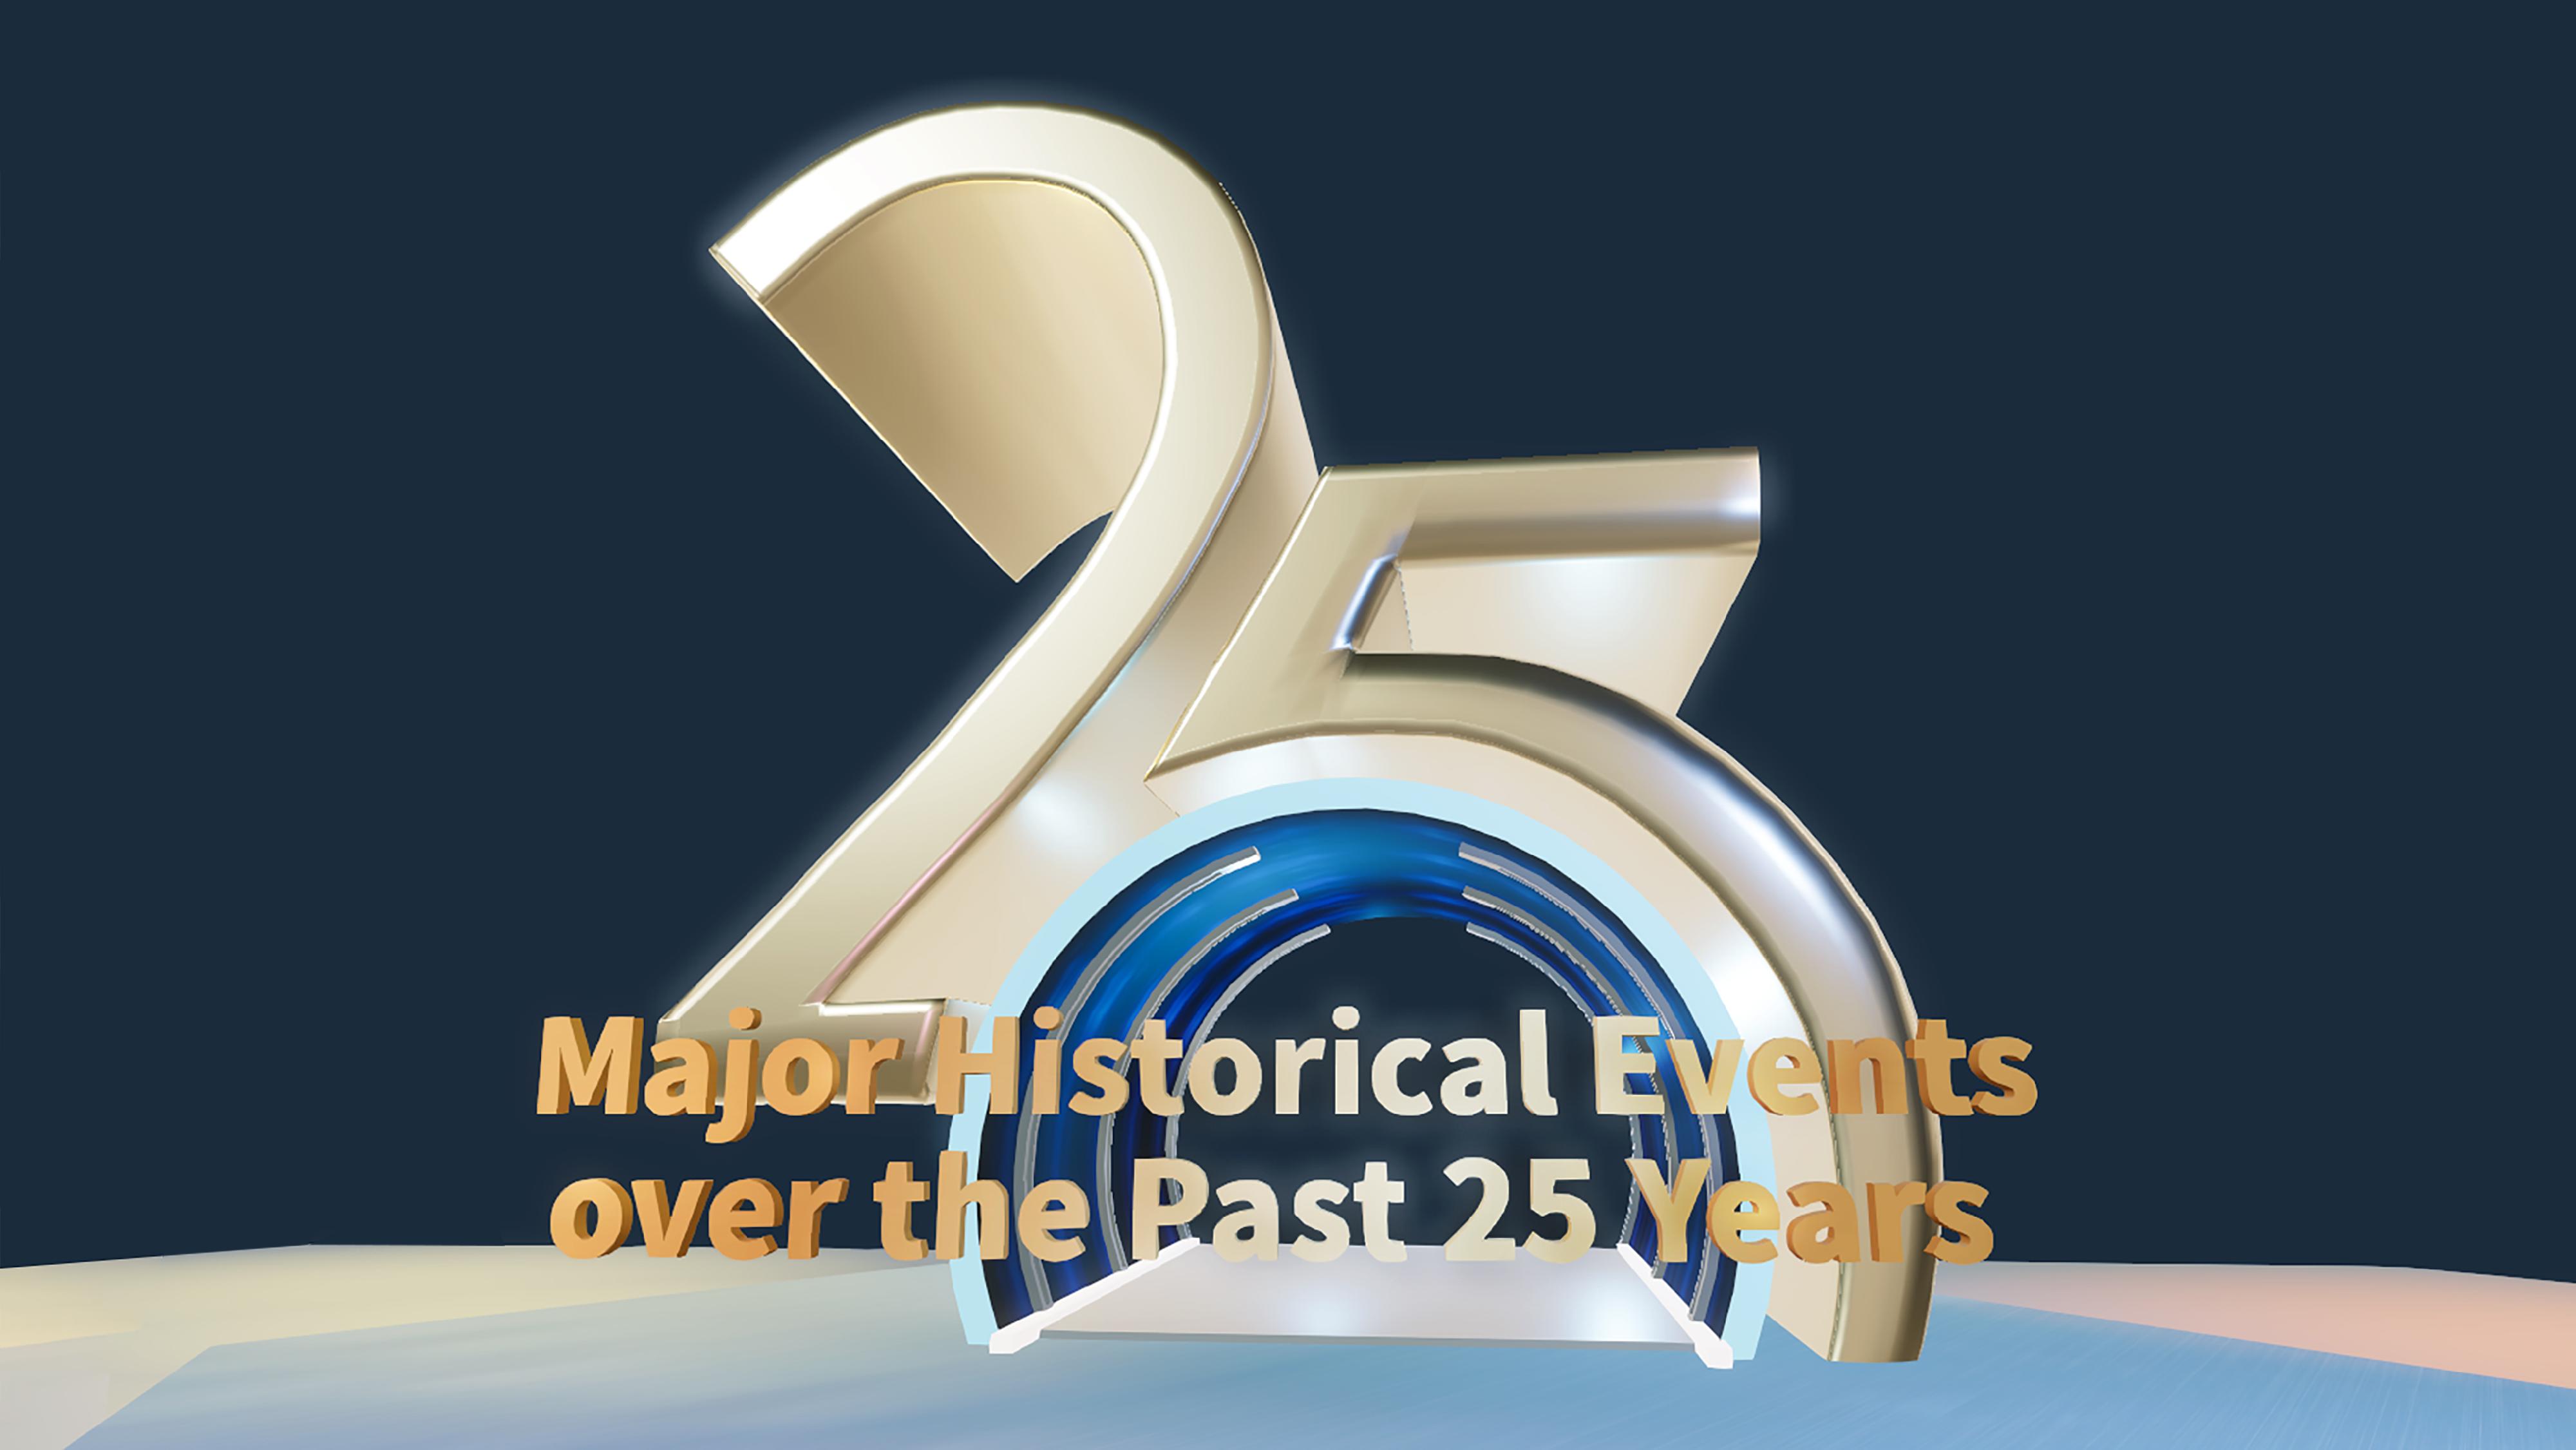 The online exhibition celebrating the 25th anniversary of the establishment of the Hong Kong Special Administrative Region was launched today (June 17). The "Major Historical Events over the Past 25 Years" zone allows visitors to review on the major events in Hong Kong in the past 25 years as if they were travelling through a time tunnel.